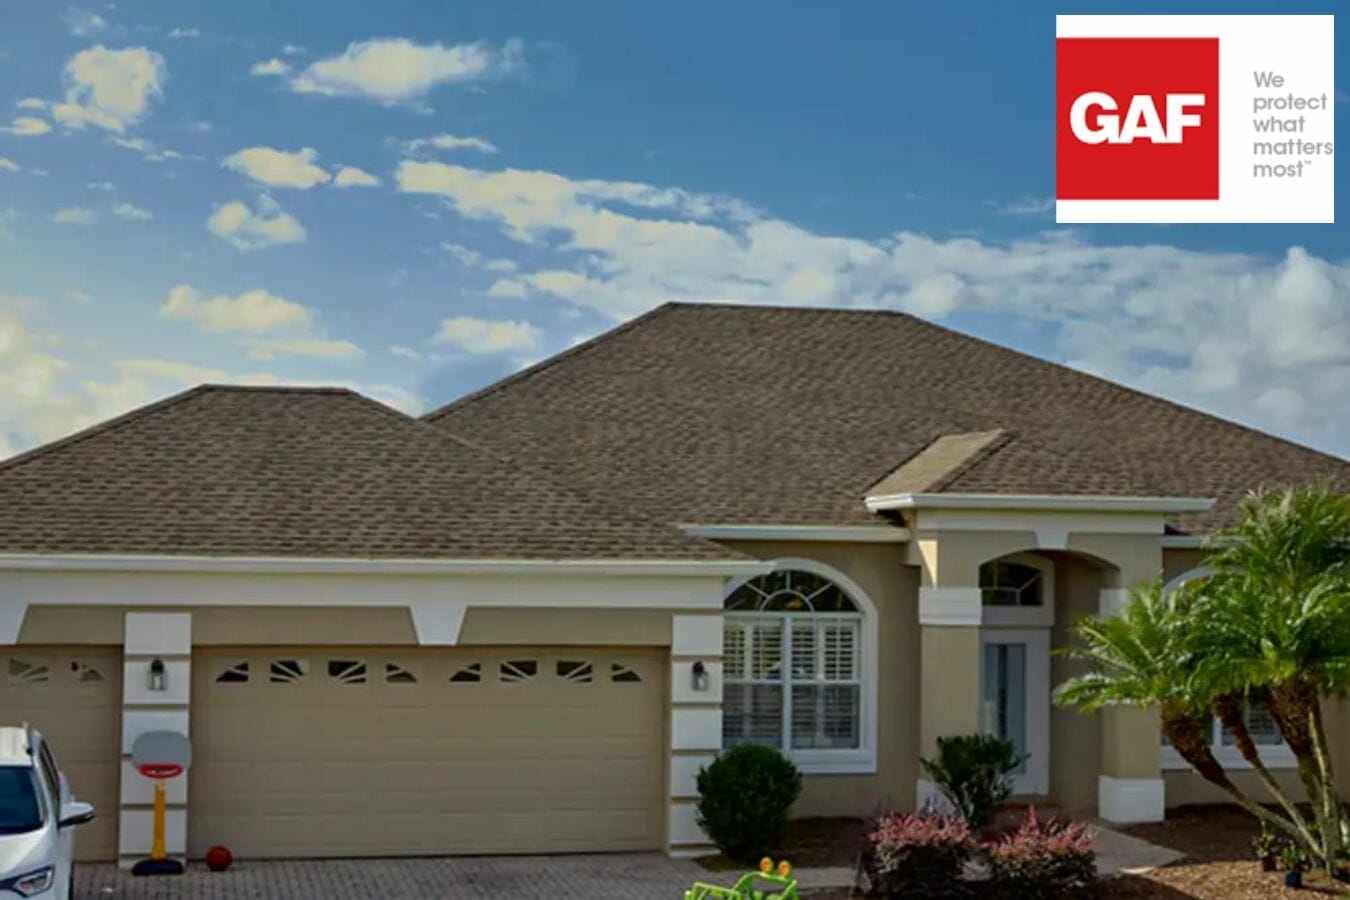 10 Most Popular GAF Timberline Shingle Colors In 2023